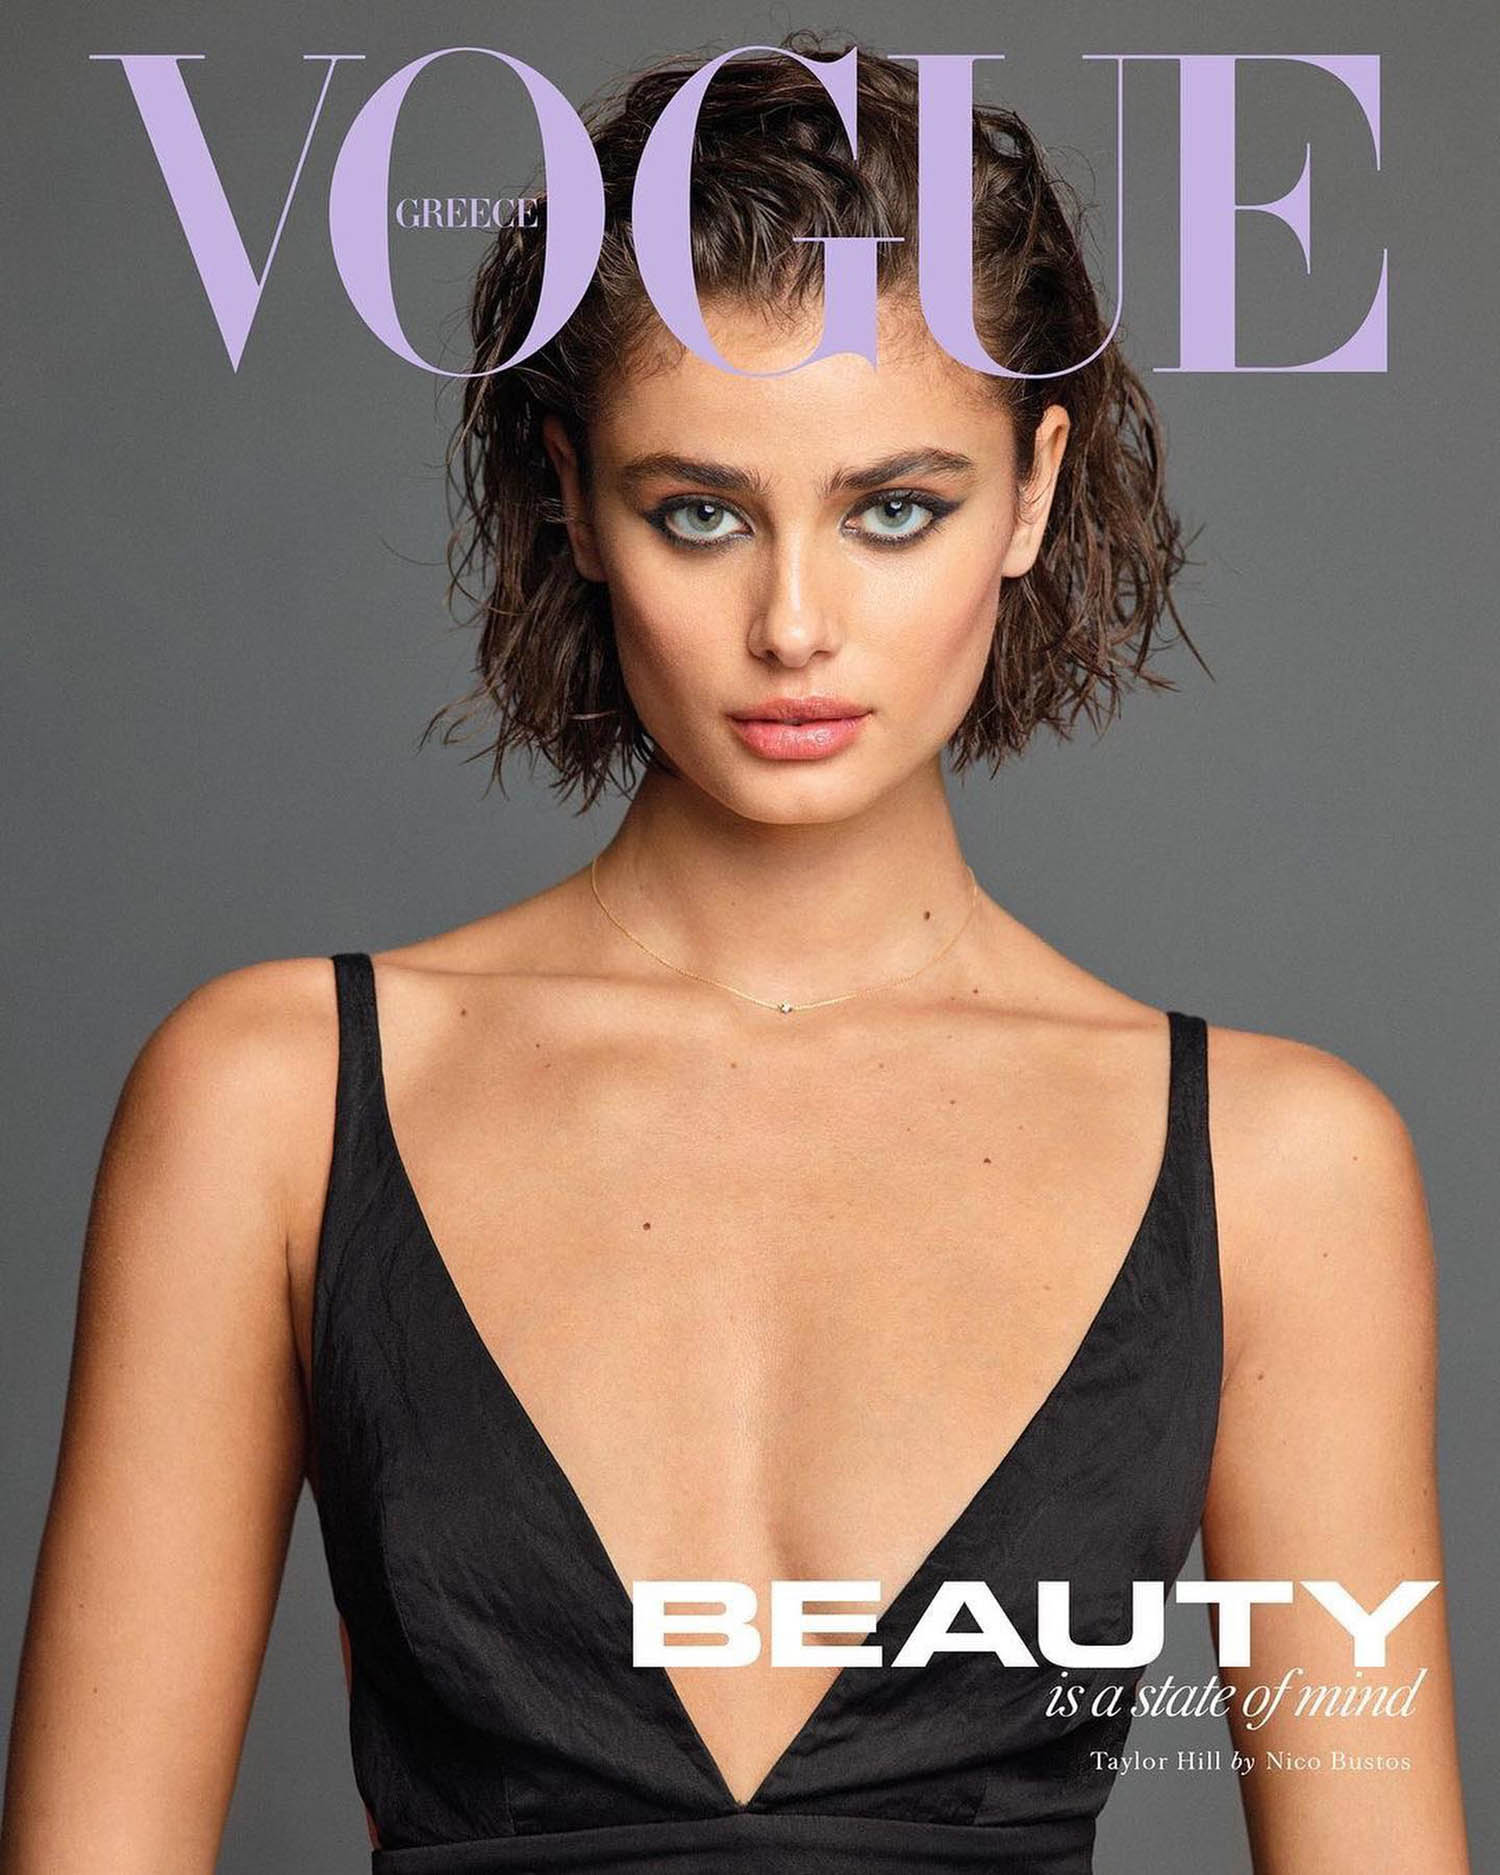 Taylor Hill covers Vogue Greece January/February 2021 by Nico Bustos